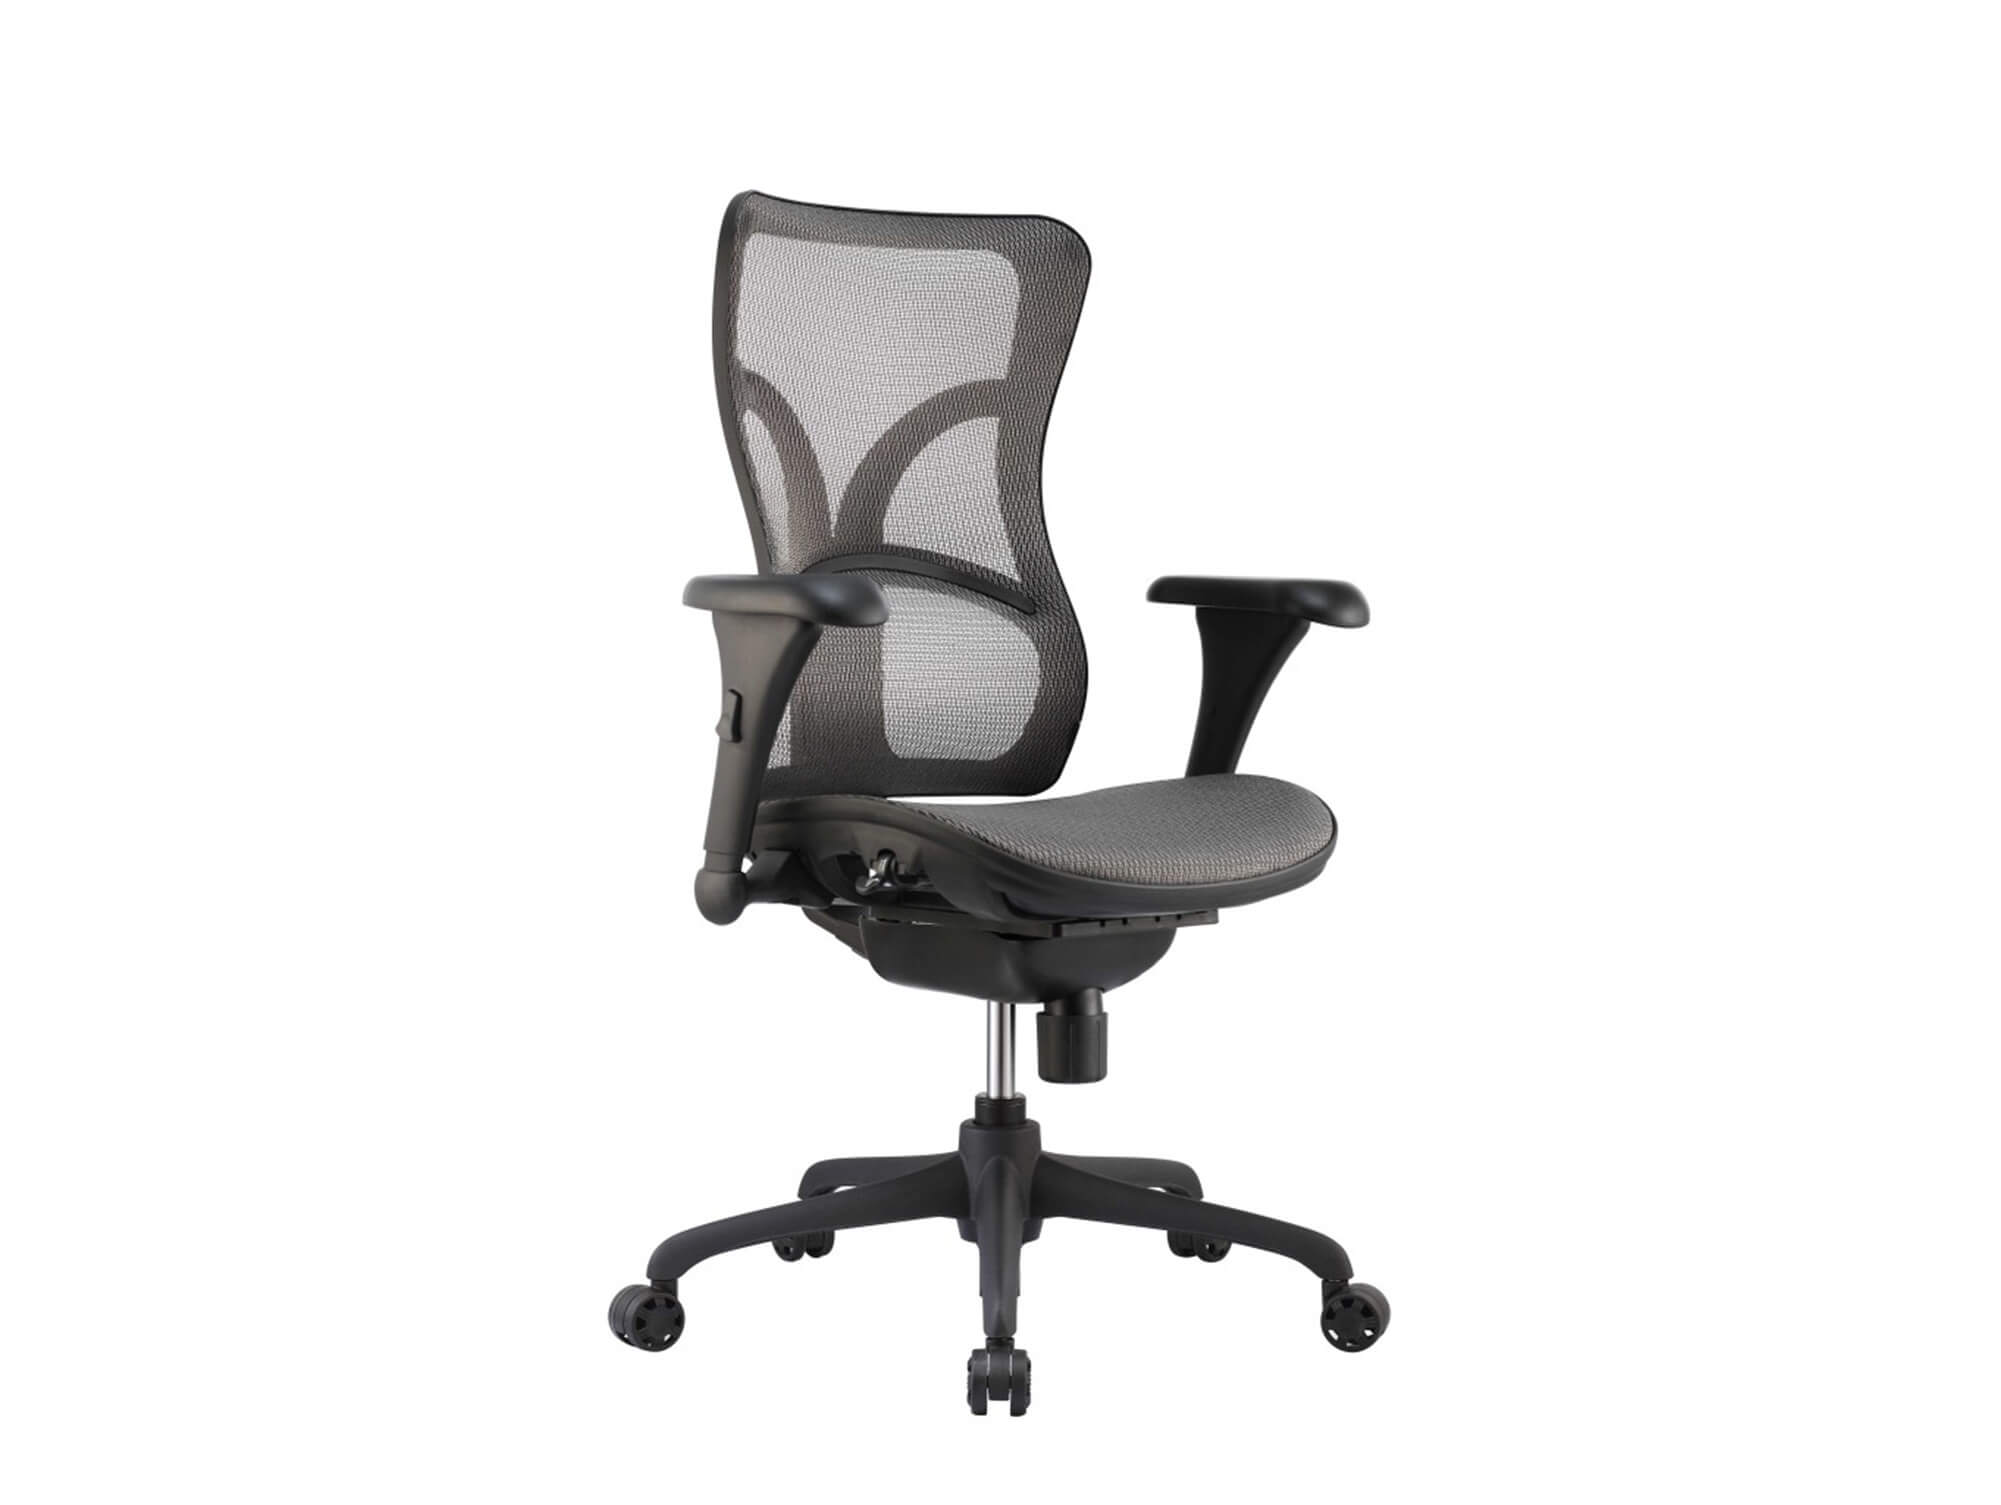 chairs-for-office-adjustable-office-chair.jpg